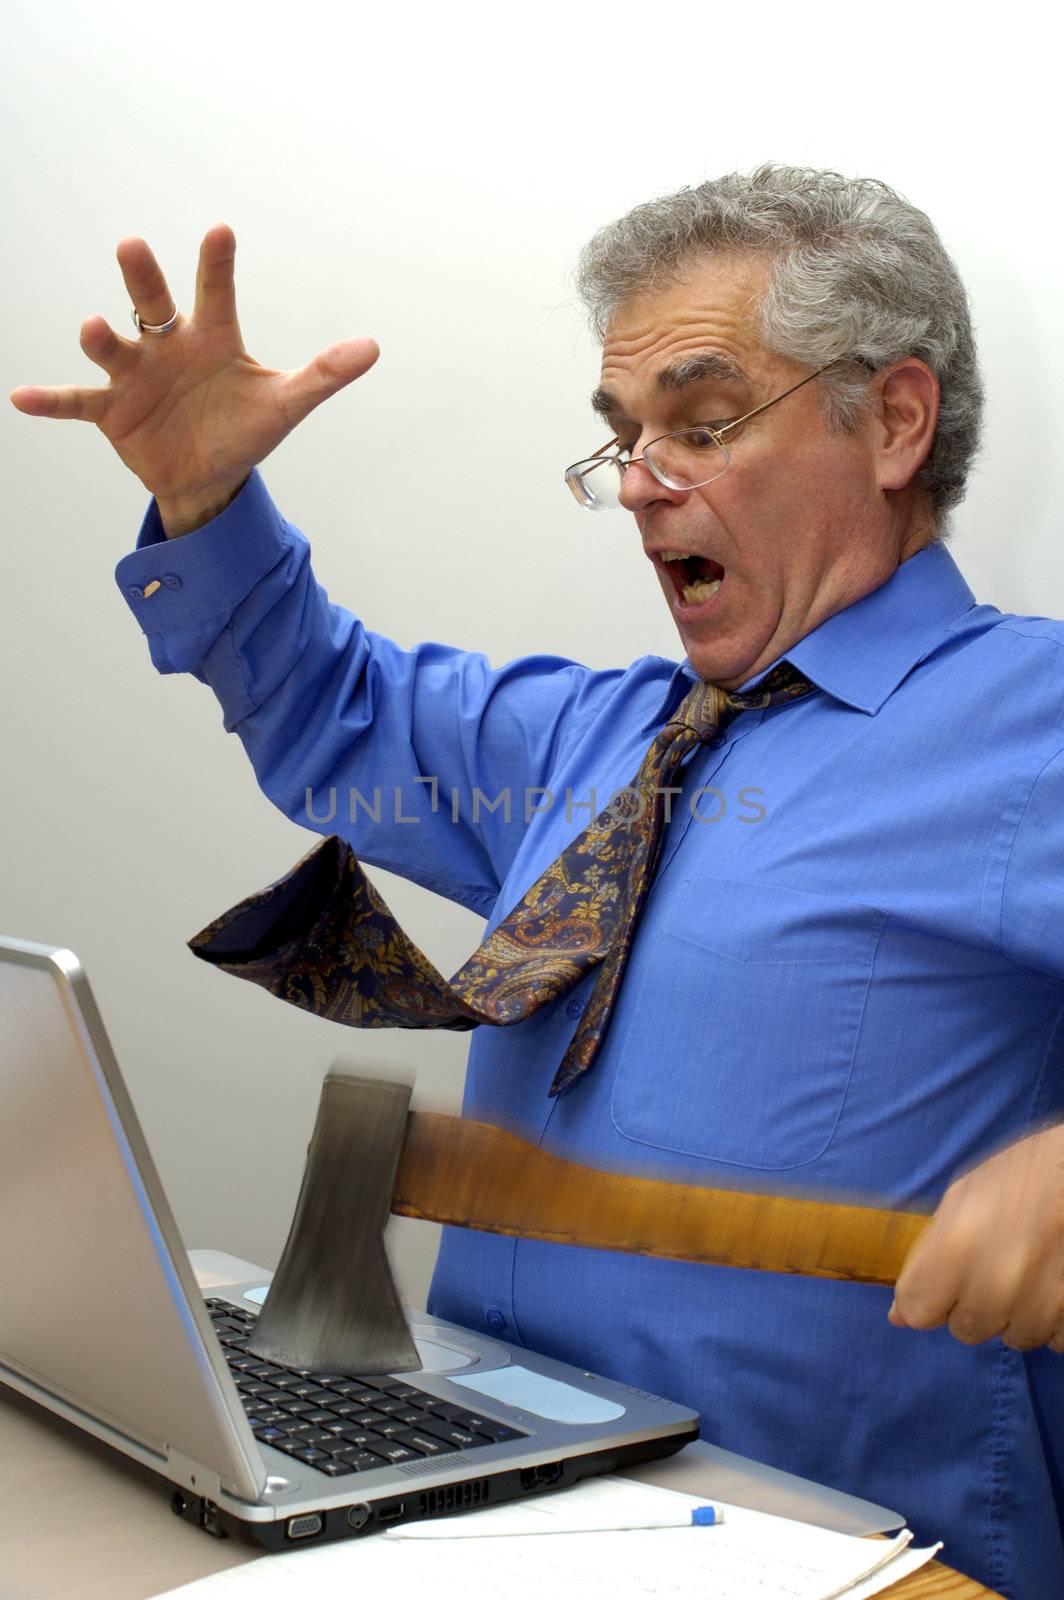 An older businessman fed up with his laptop, takes an axe to it.